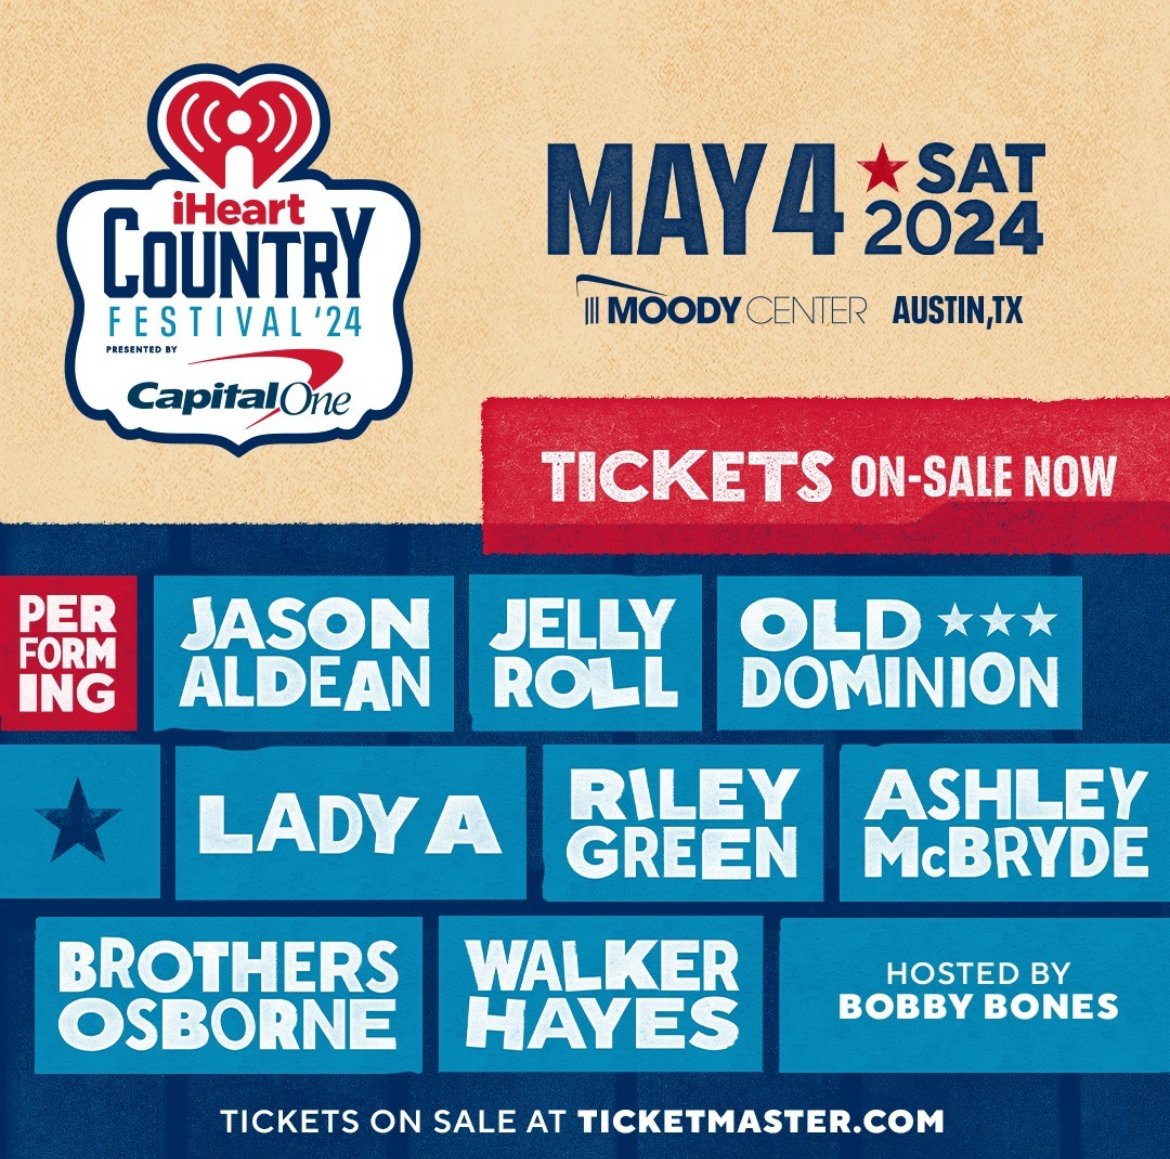 iHeartCountry Festival